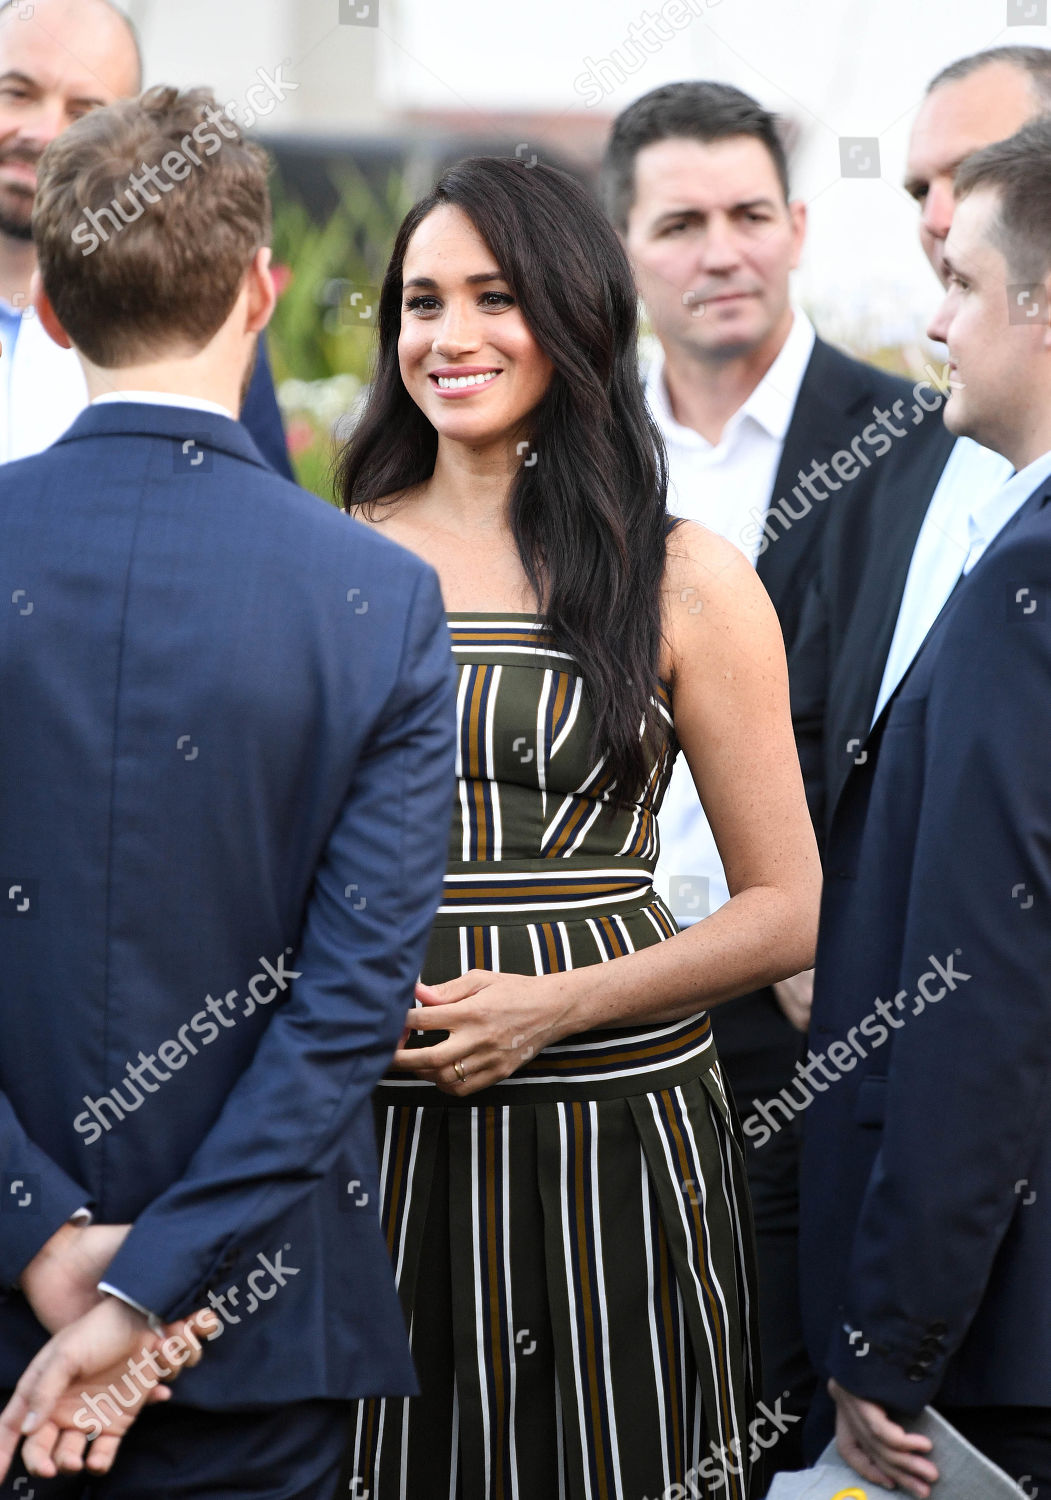 prince-harry-and-meghan-duchess-of-sussex-visit-to-africa-shutterstock-editorial-10422975m.jpg